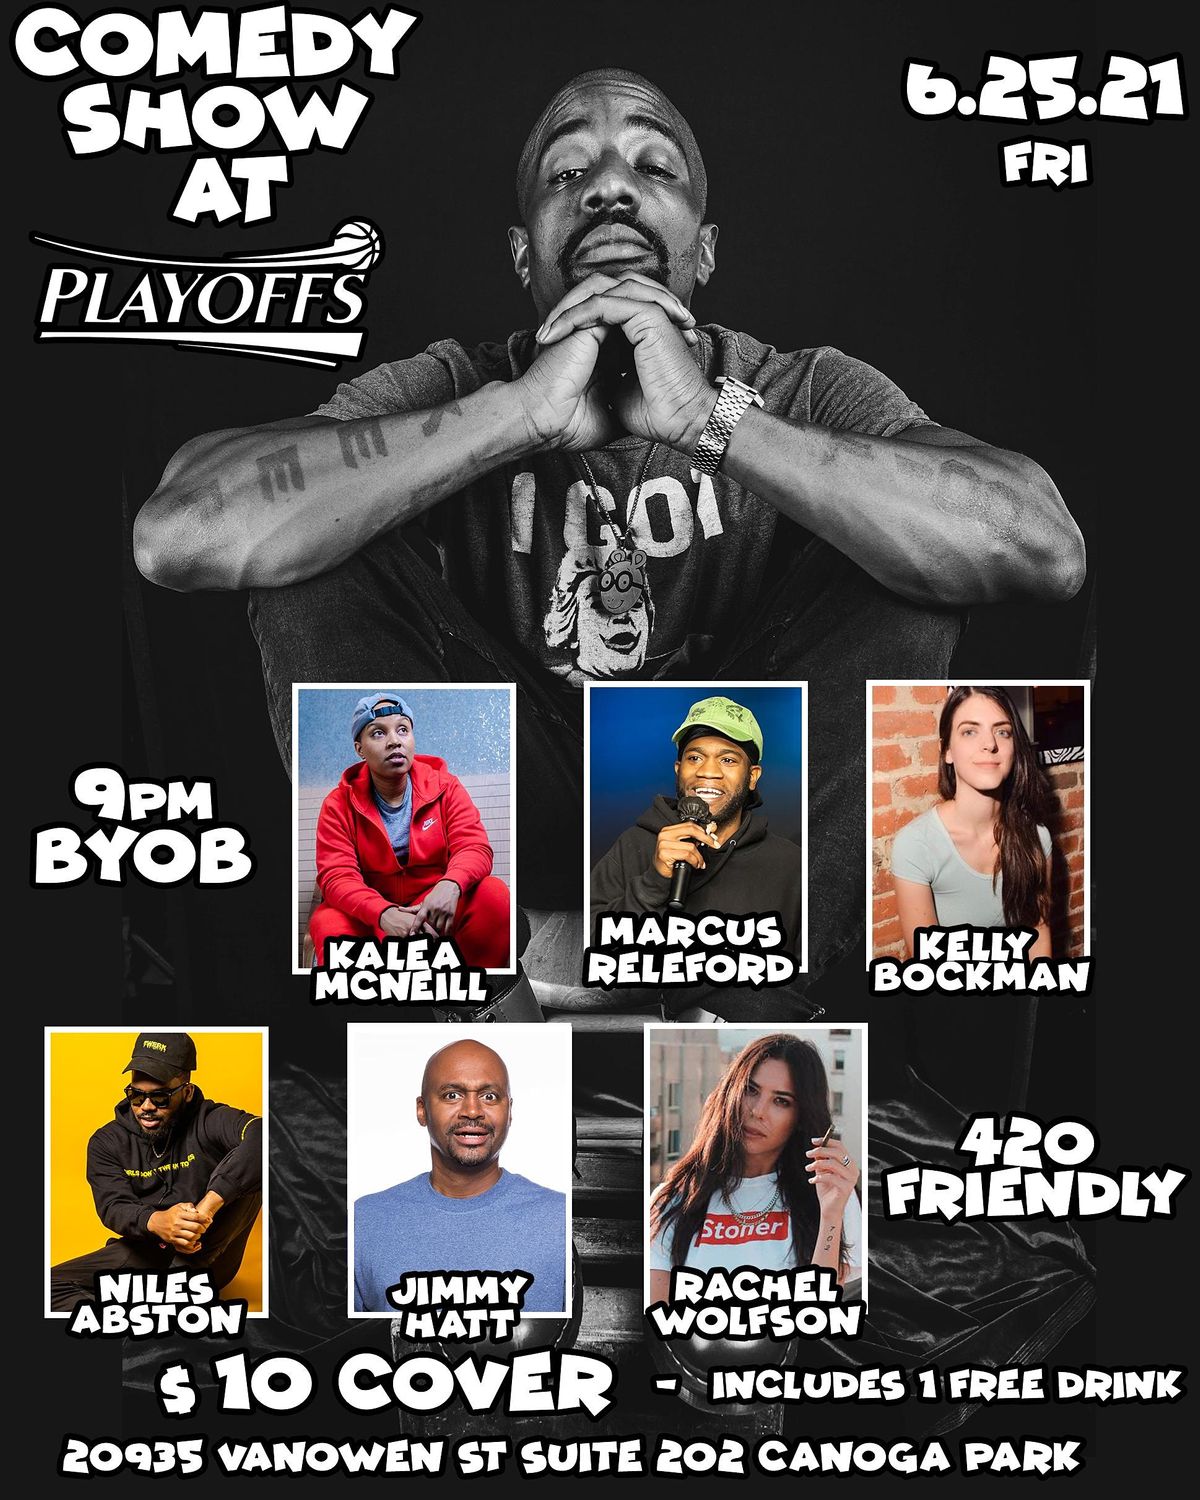 Comedy Show at Playoffs